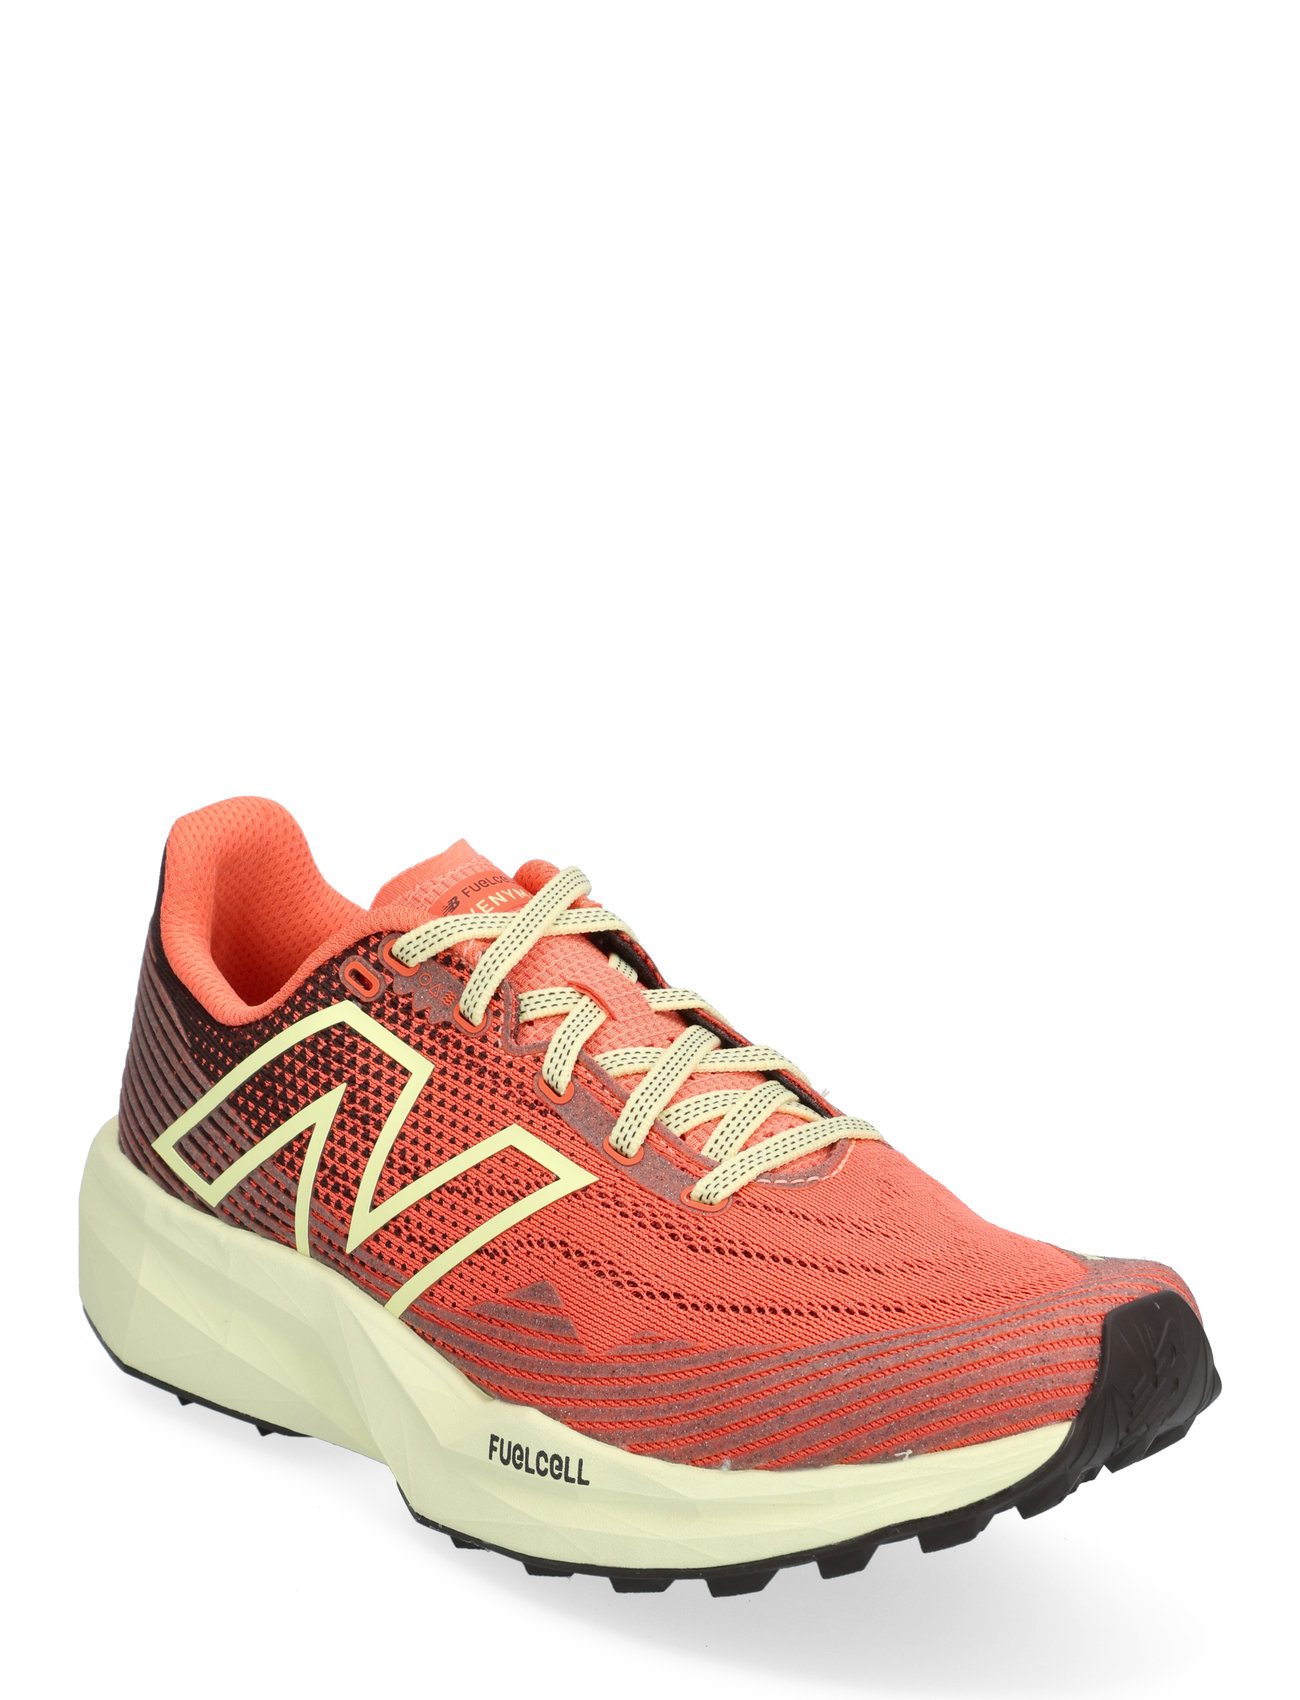 New Balance Fuelcell Summit Unknown V5 Sport Sport Shoes Running Shoes Red New Balance